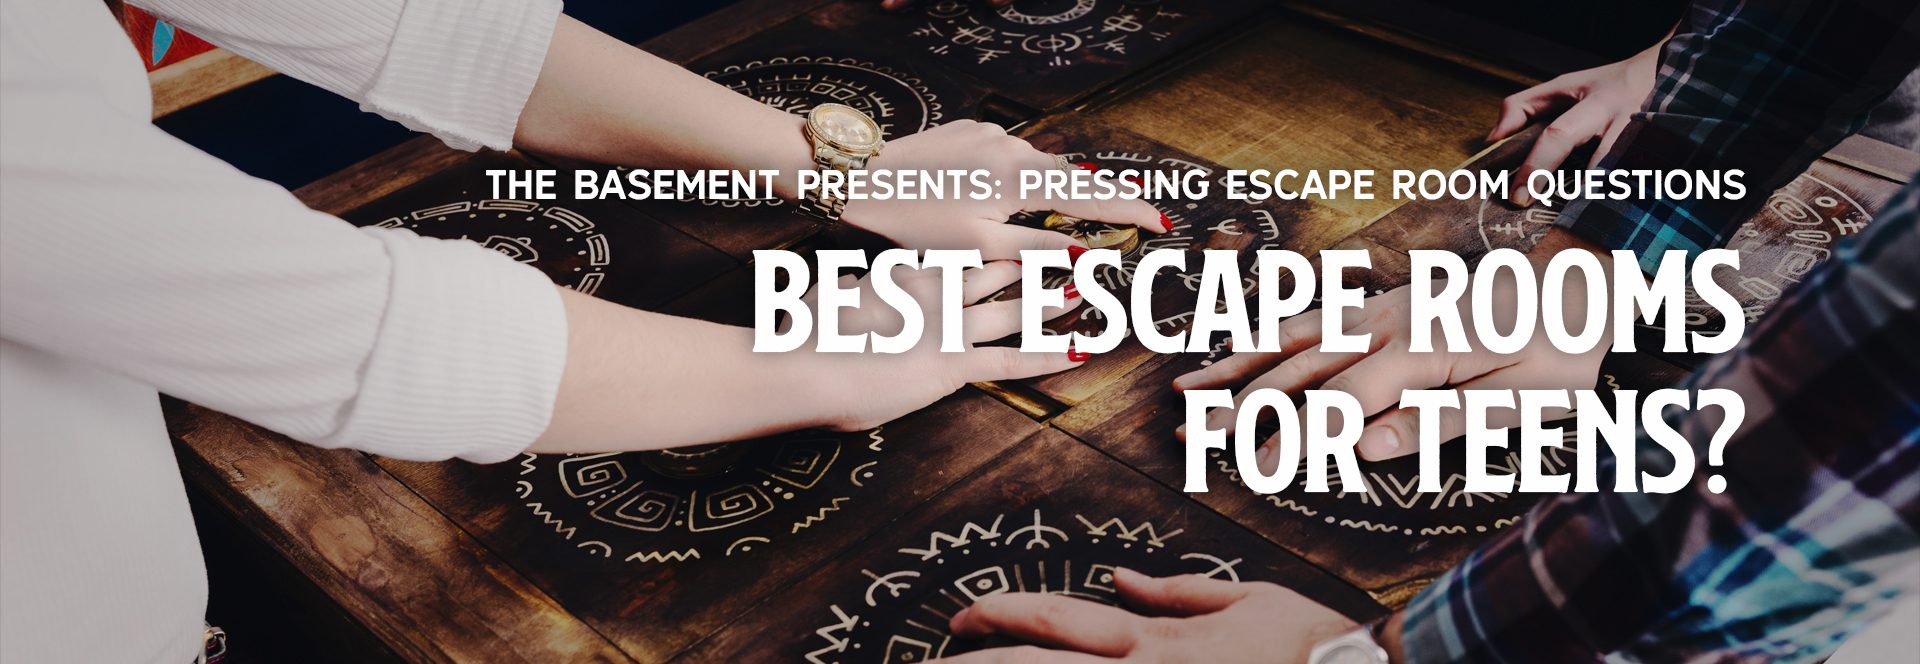 The Best Escape Rooms For Teens